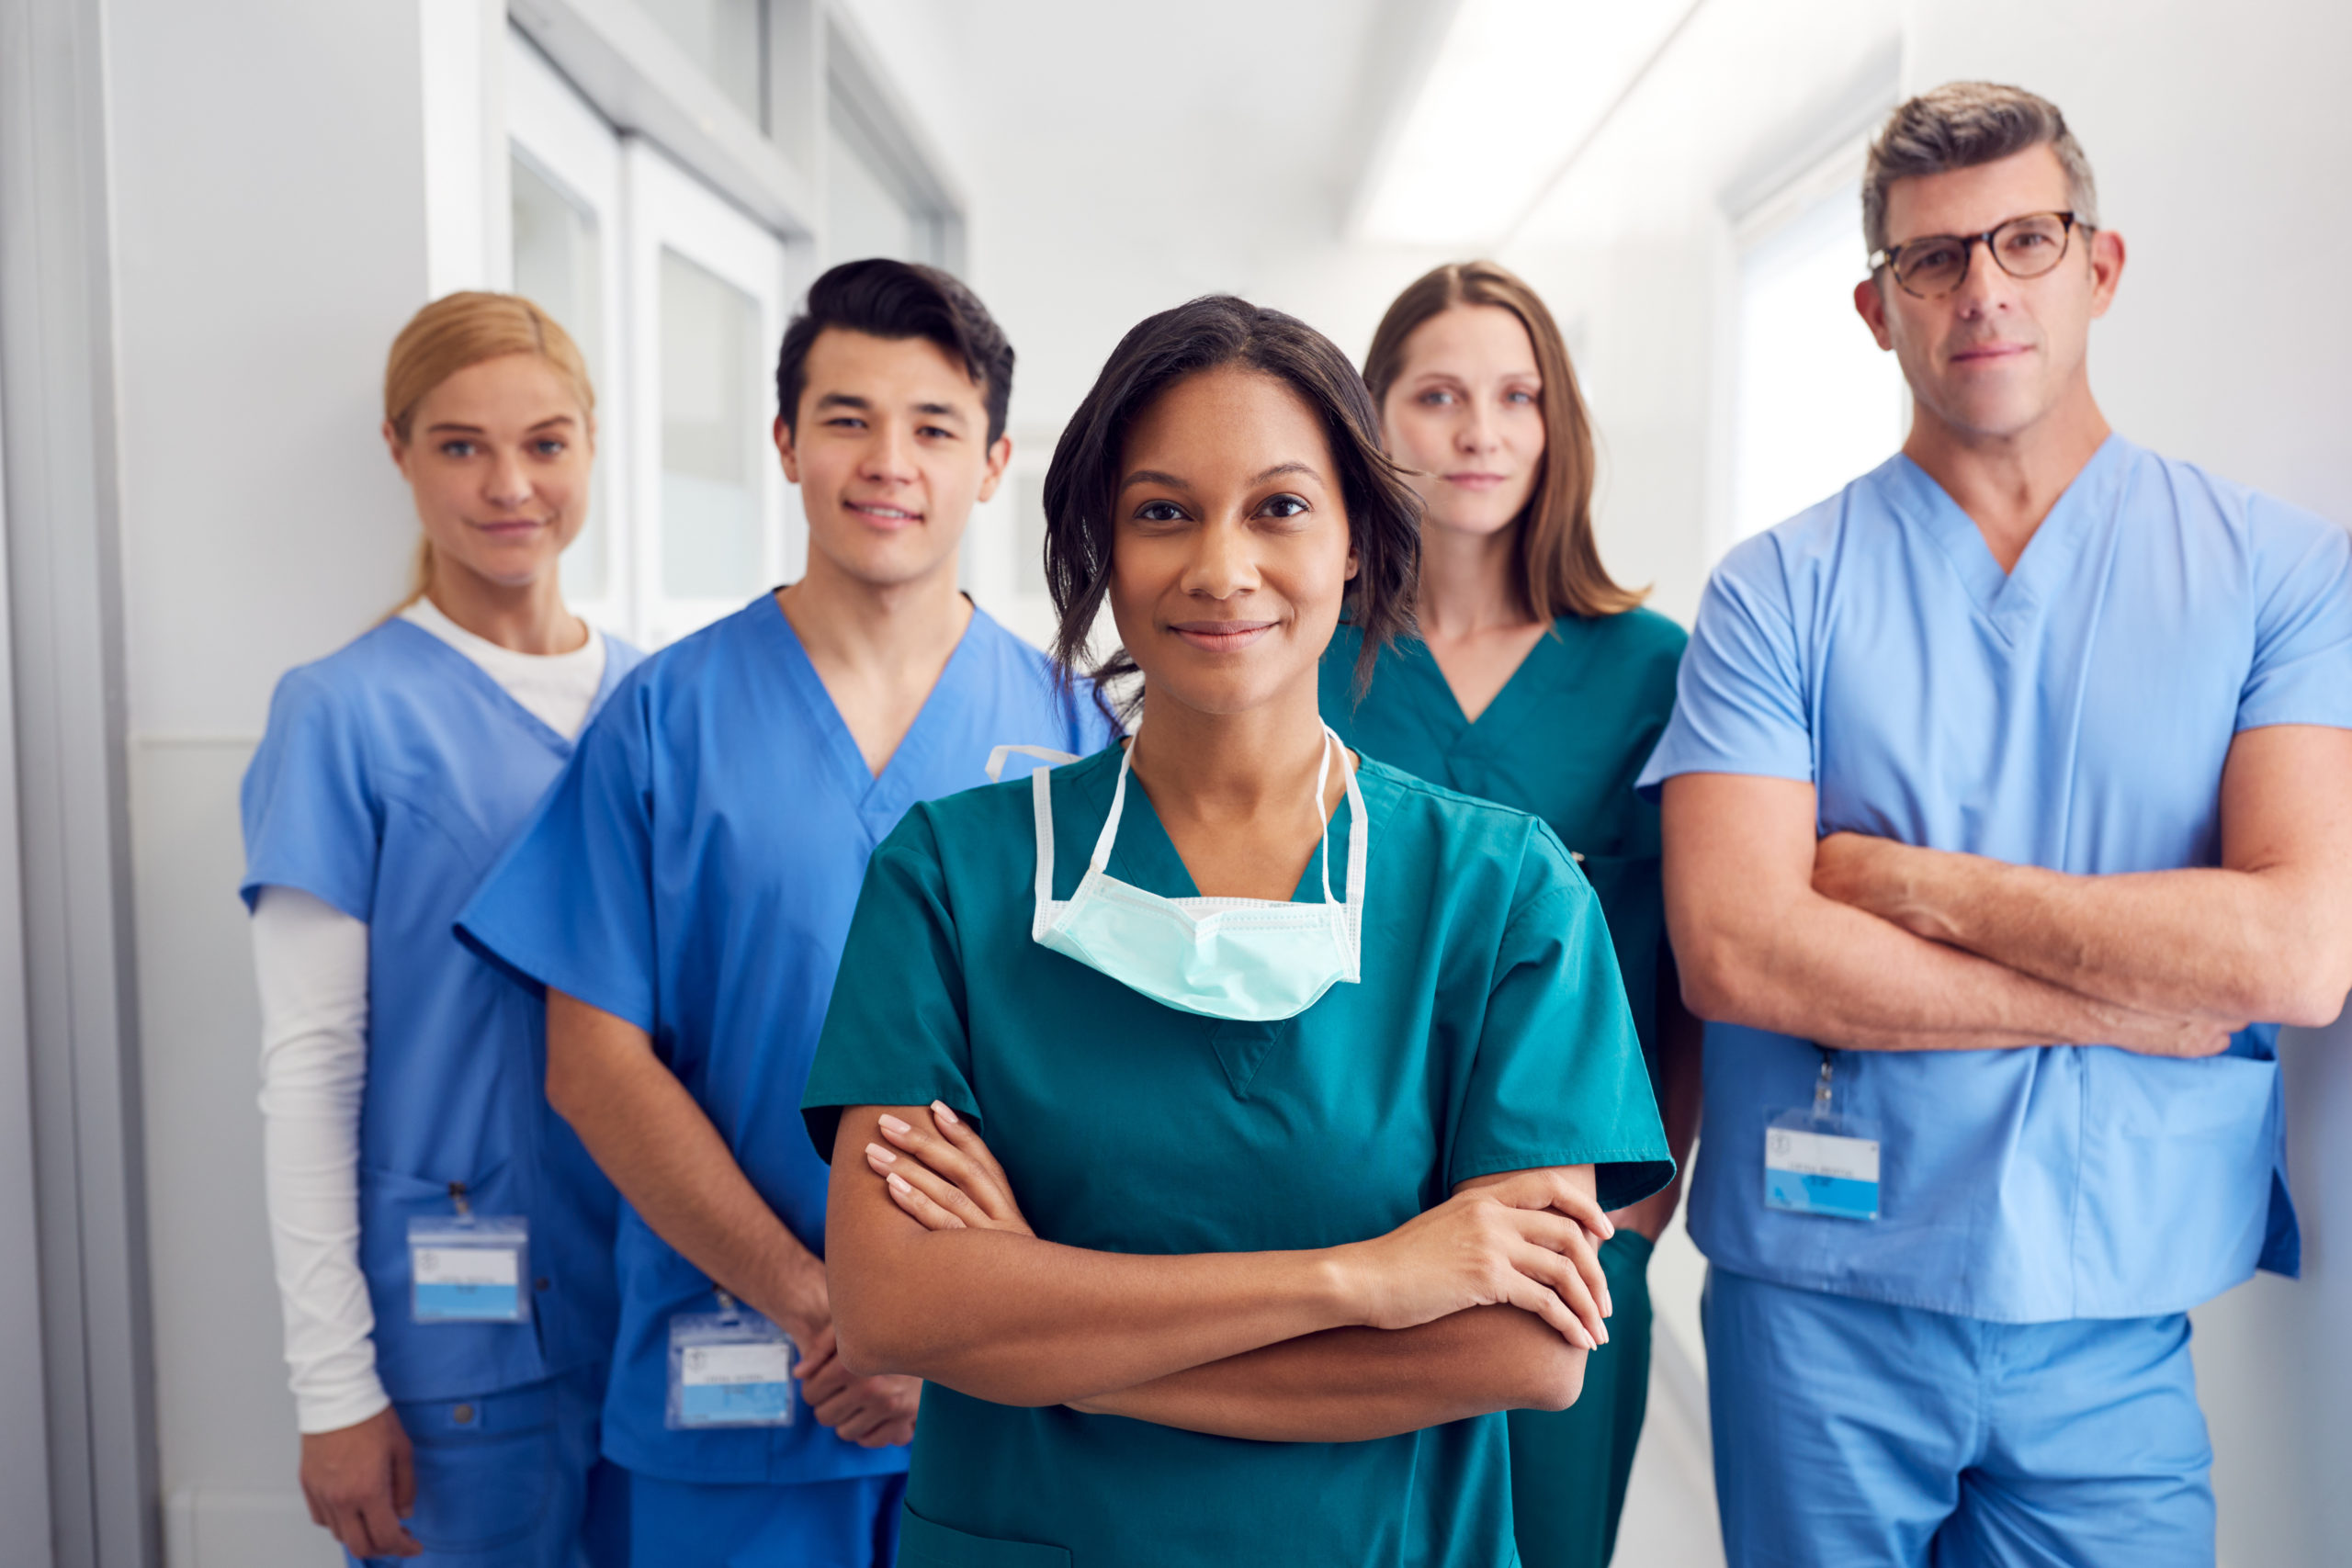 How to find a nursing job in Canada?